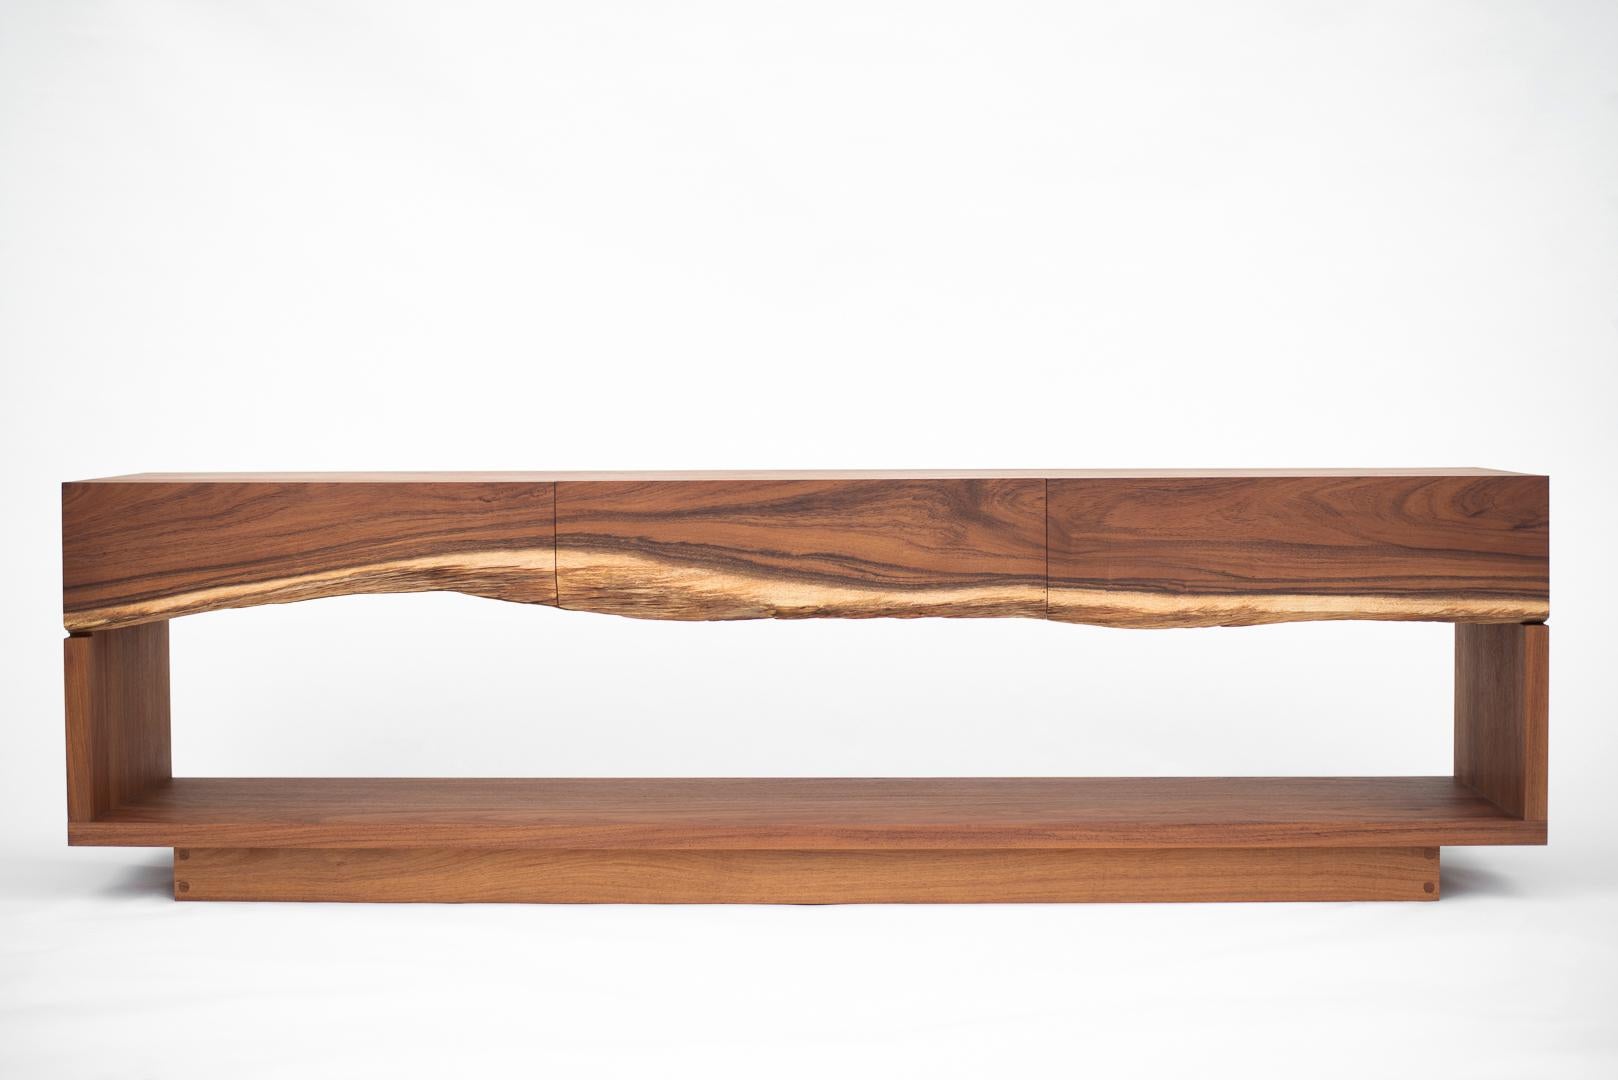 A sideboard with three drawers, crafted from a single plank with natural Caribbean Walnut wood.
The simple and lightweight construction of this piece aims to highlight the intrinsic beauty of tropical wood, showcasing its extraordinary organic